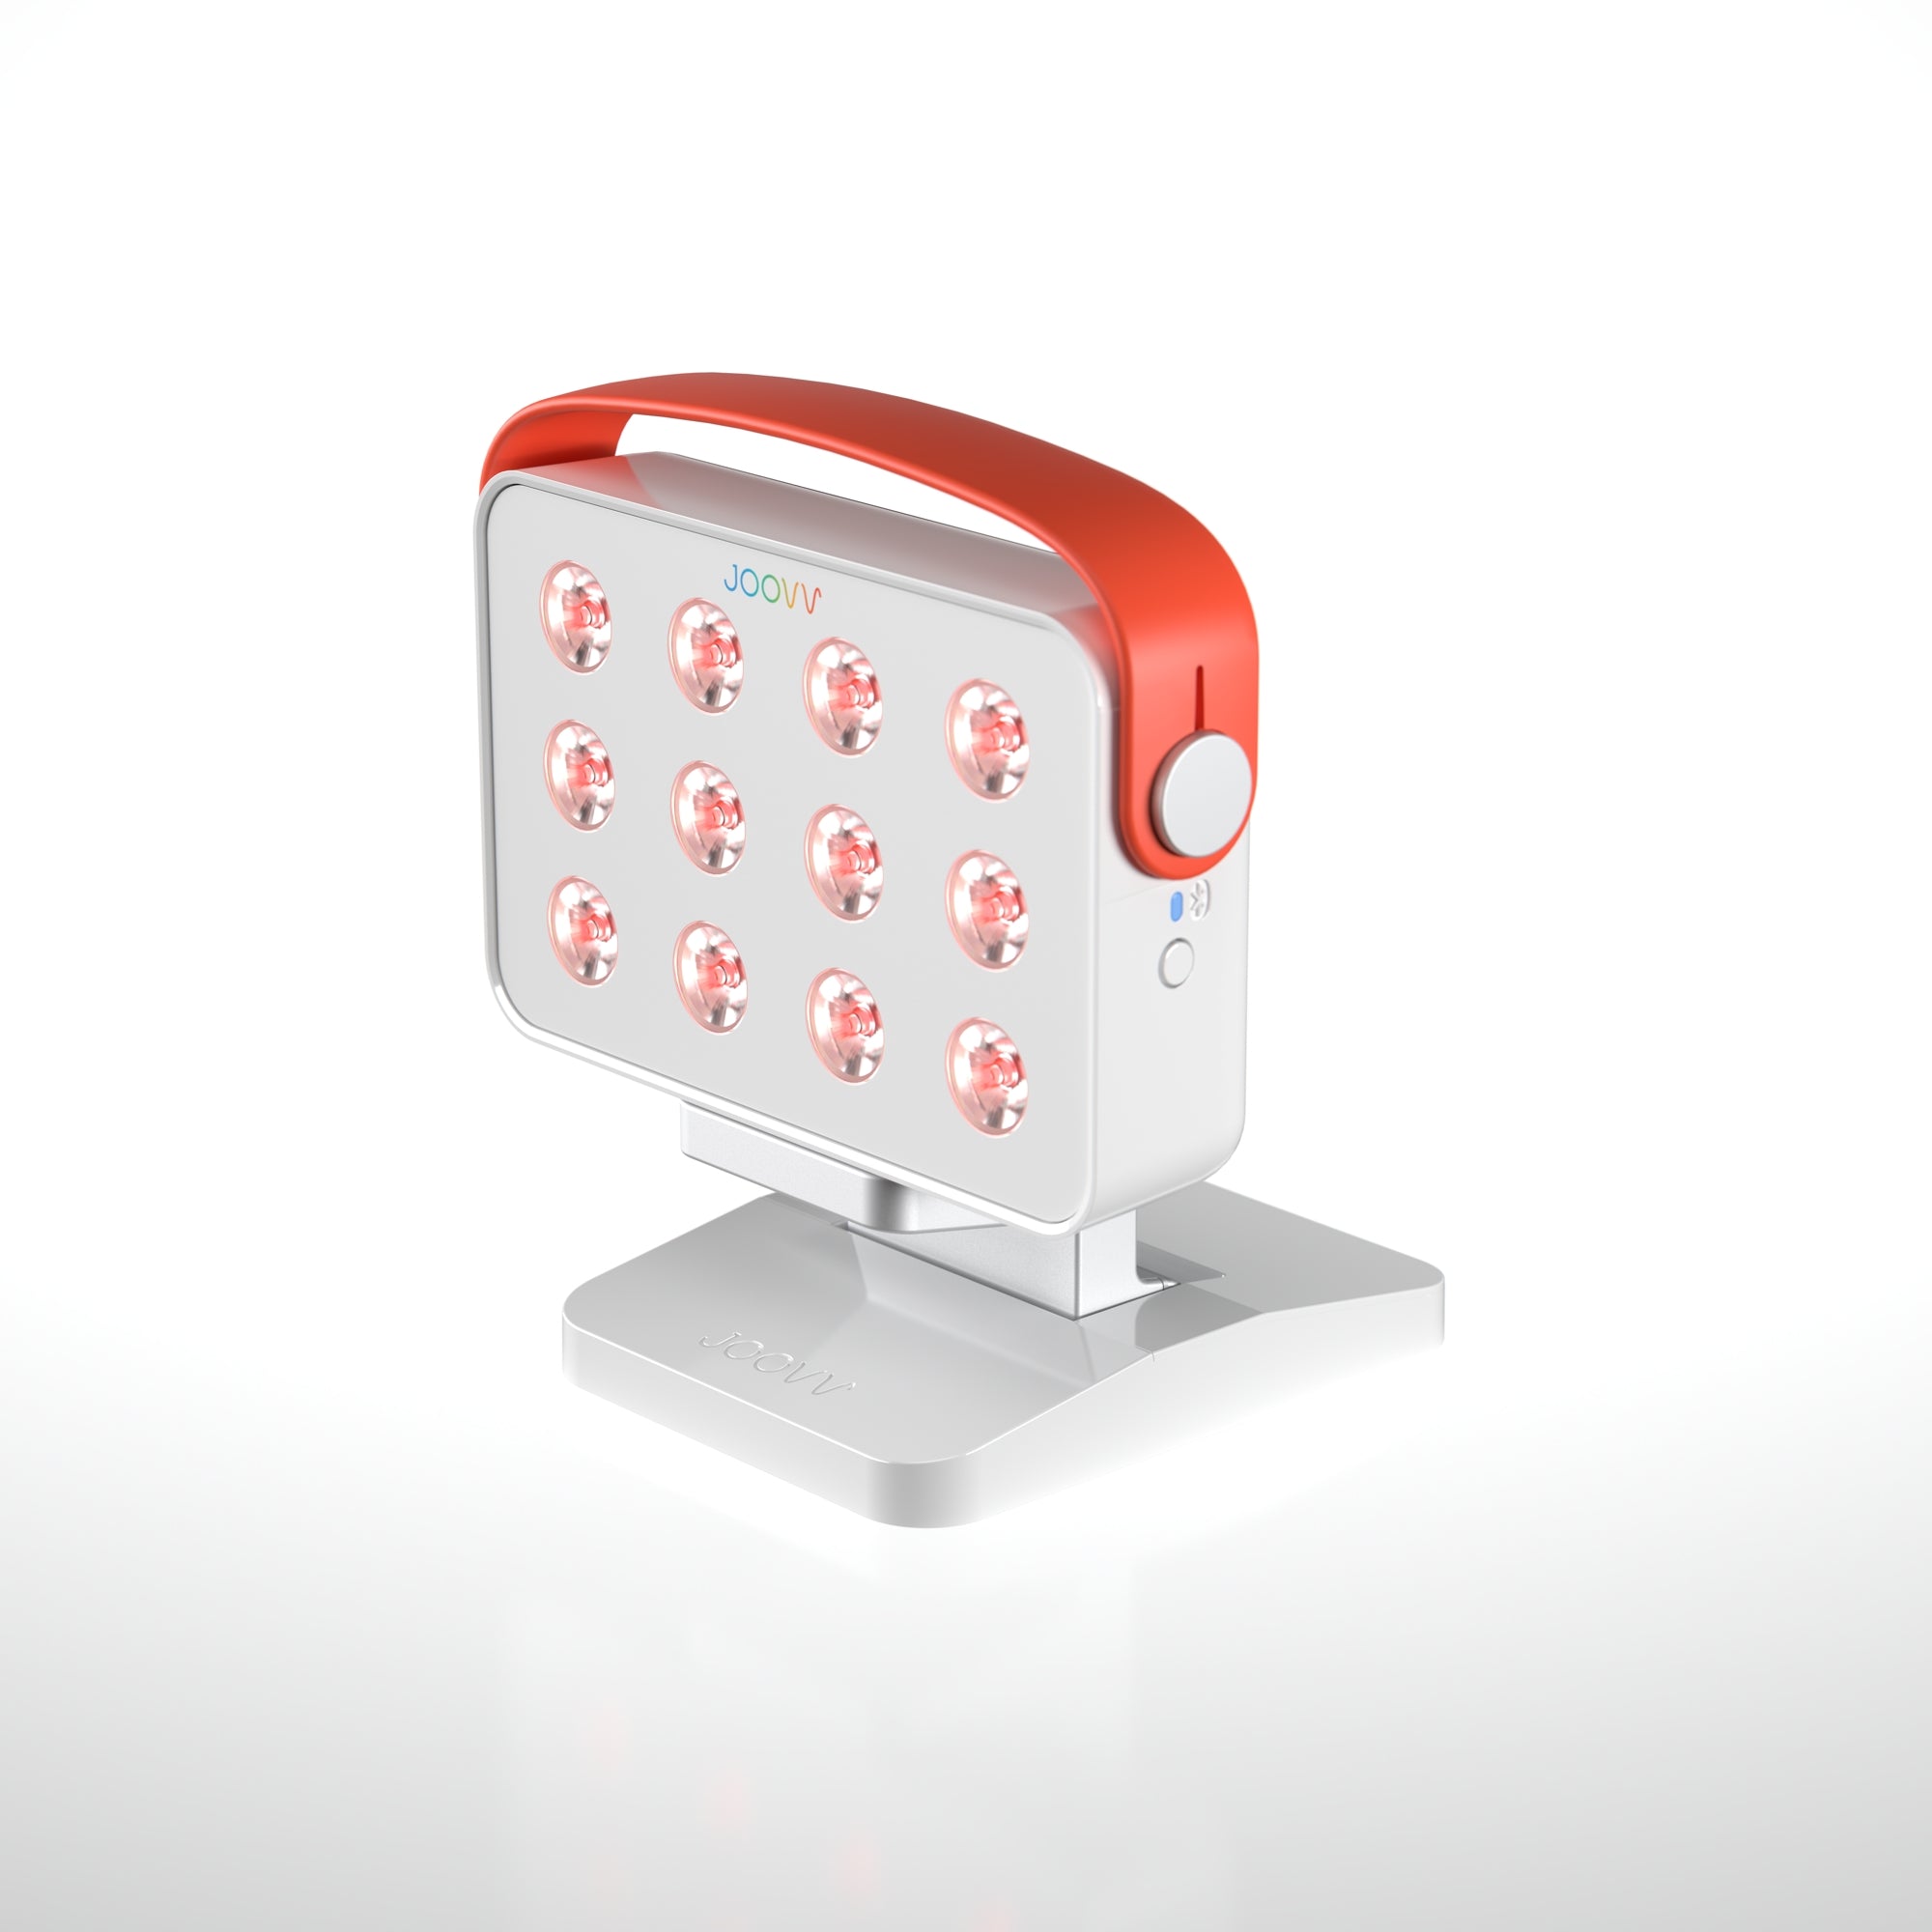 Joovv the Go 2.0 handheld red light therapy device